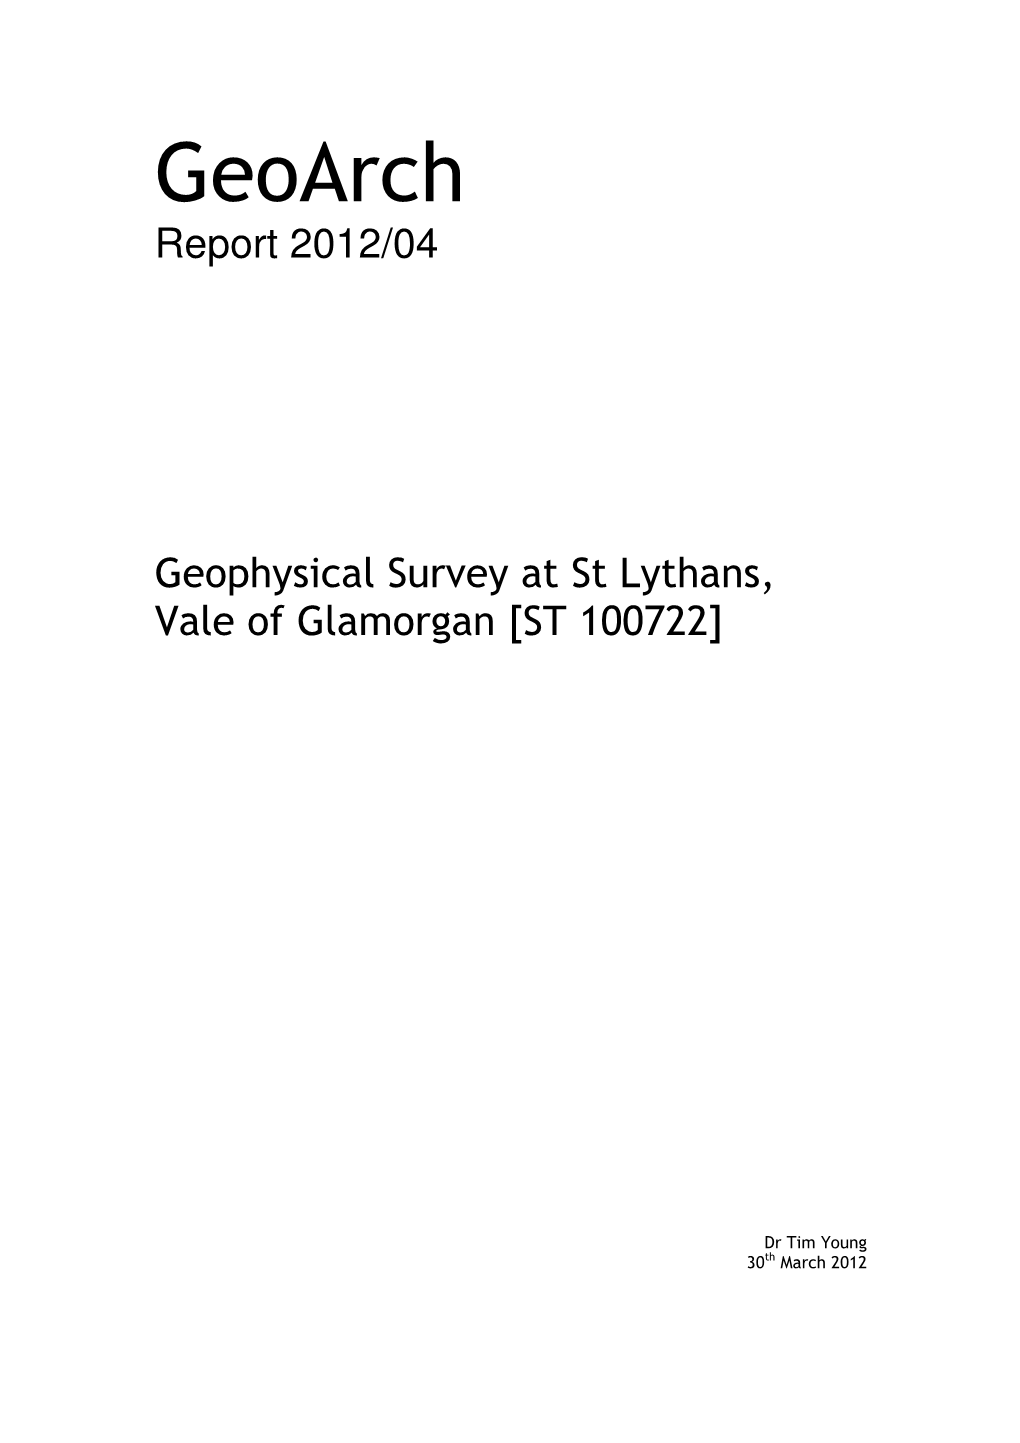 Geoarch Report 2012/04